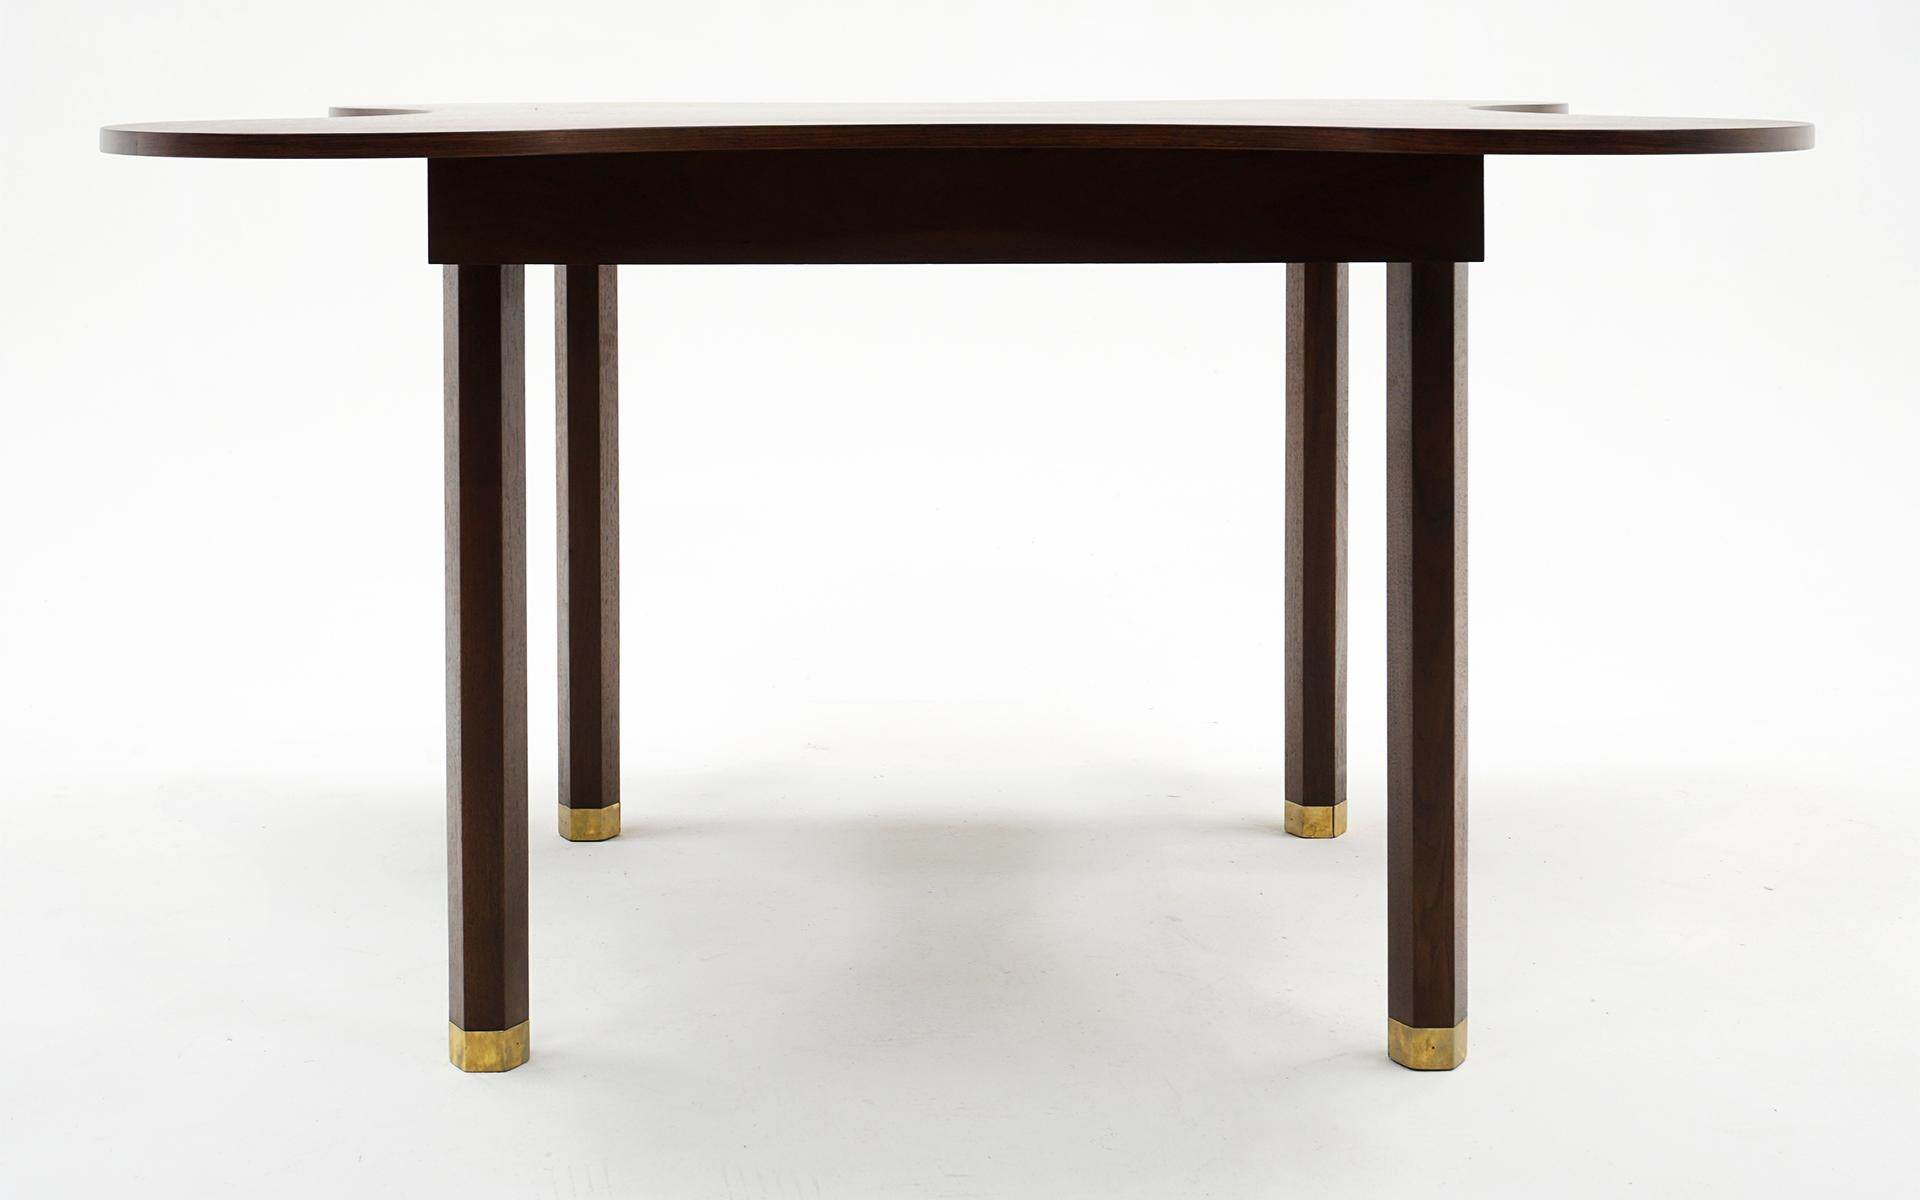 Mid-20th Century Dining / Center Table in Rosewood by Edward Wormley for Dunbar, Clover Shaped